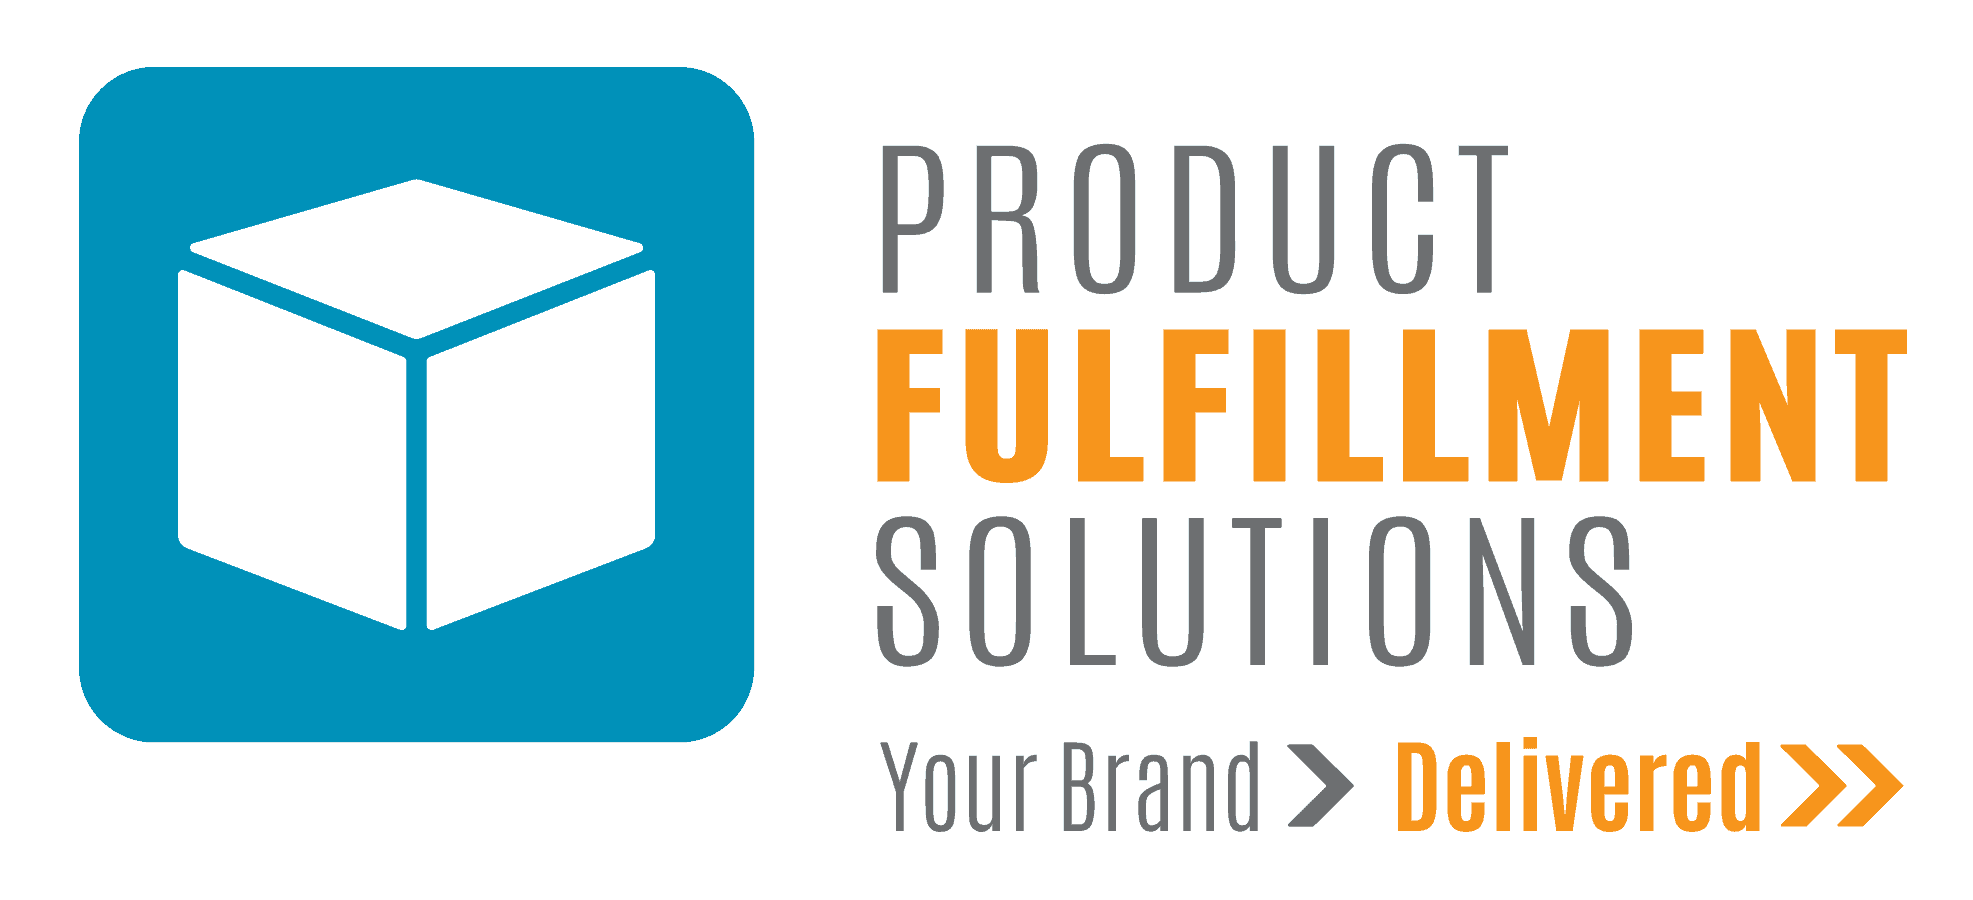 Product Fulfillment Solutions